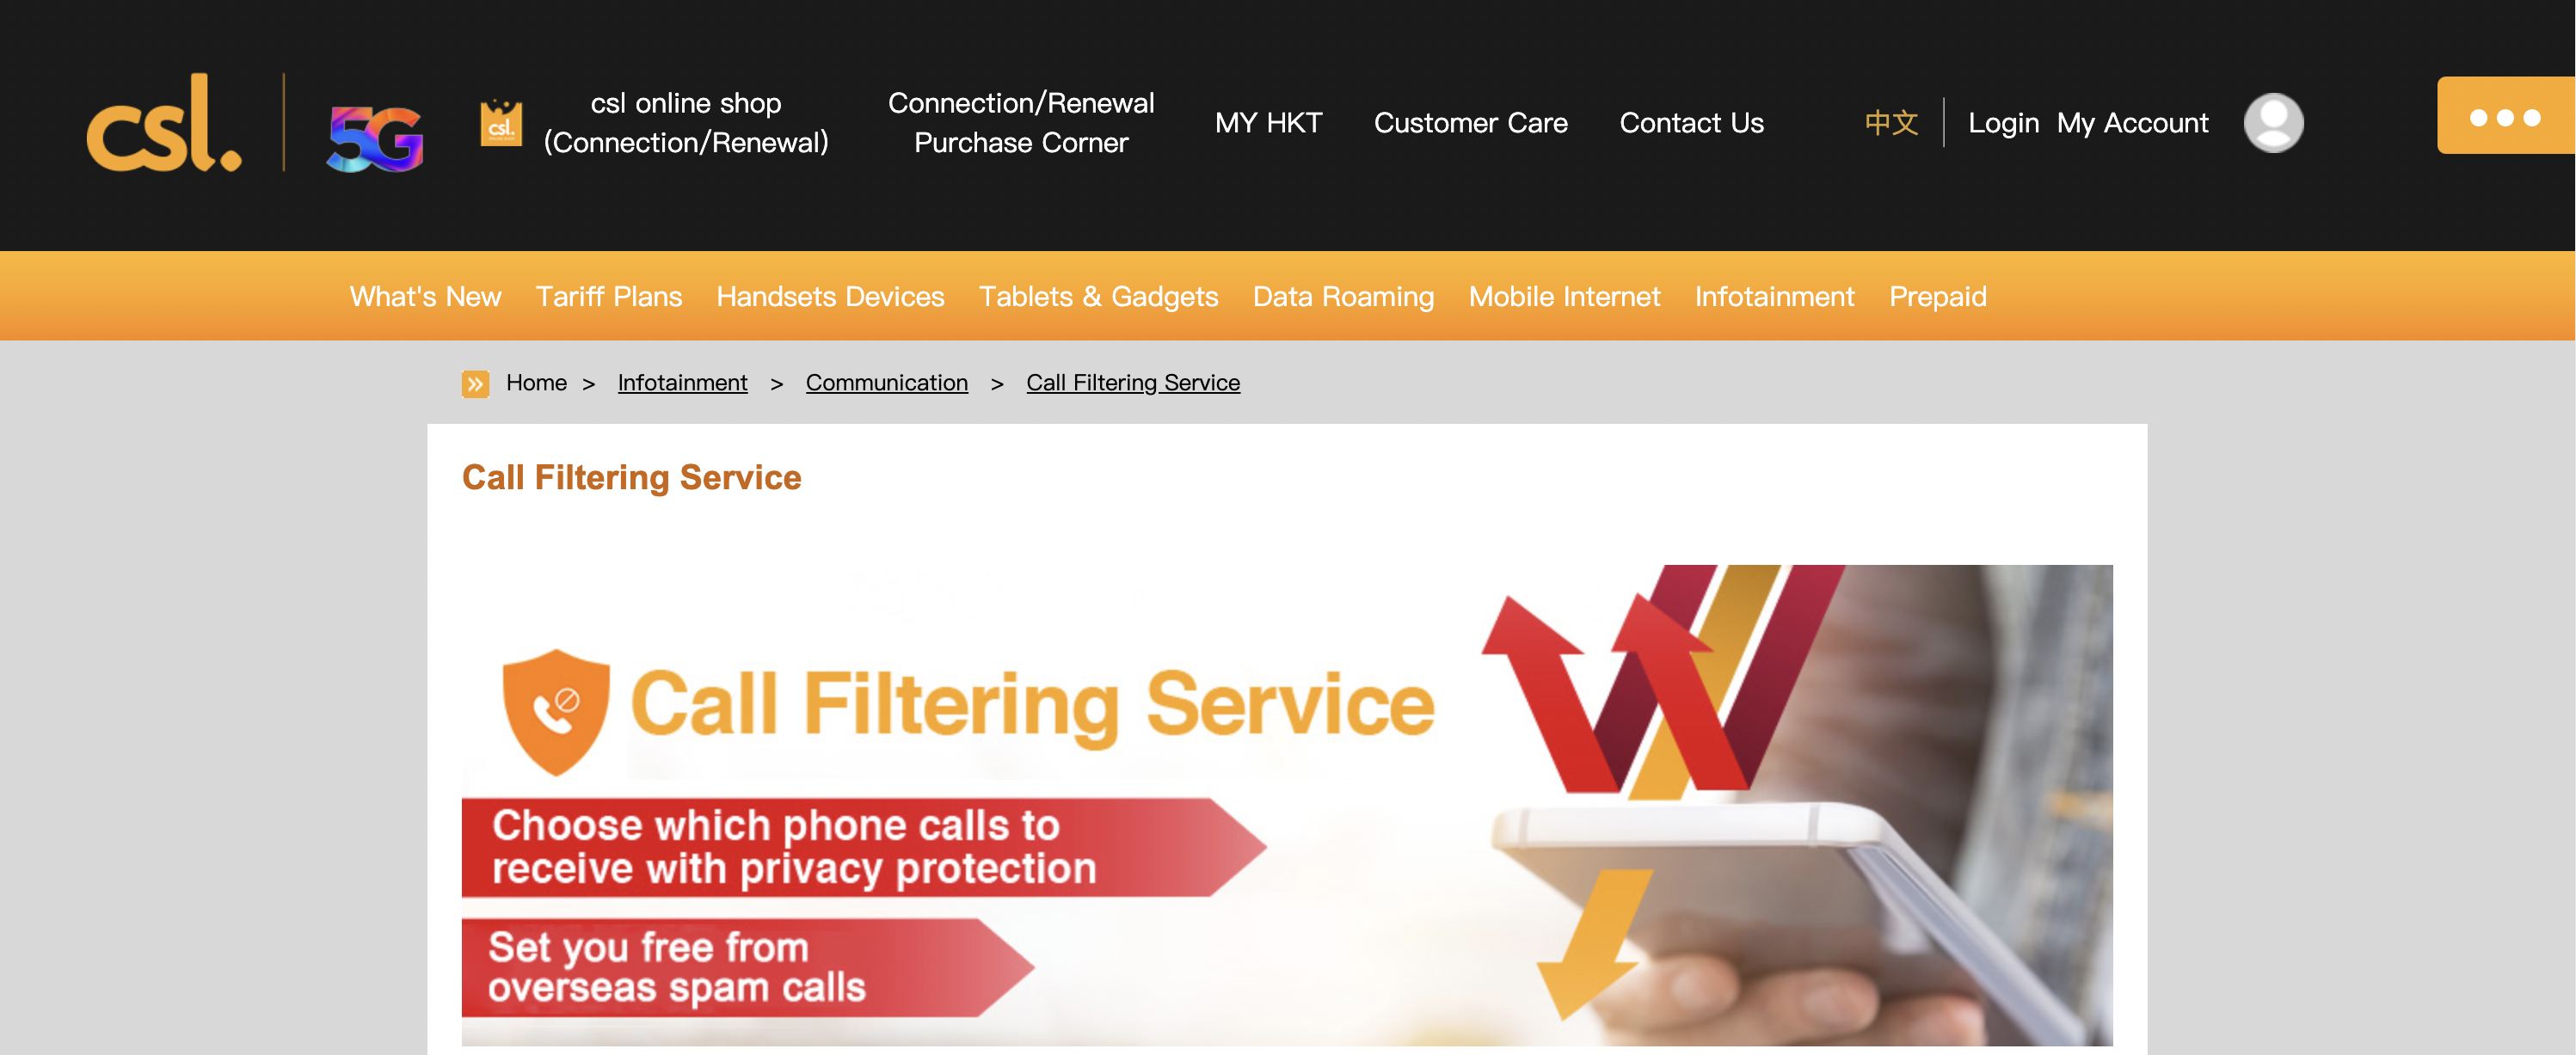 call filtering service